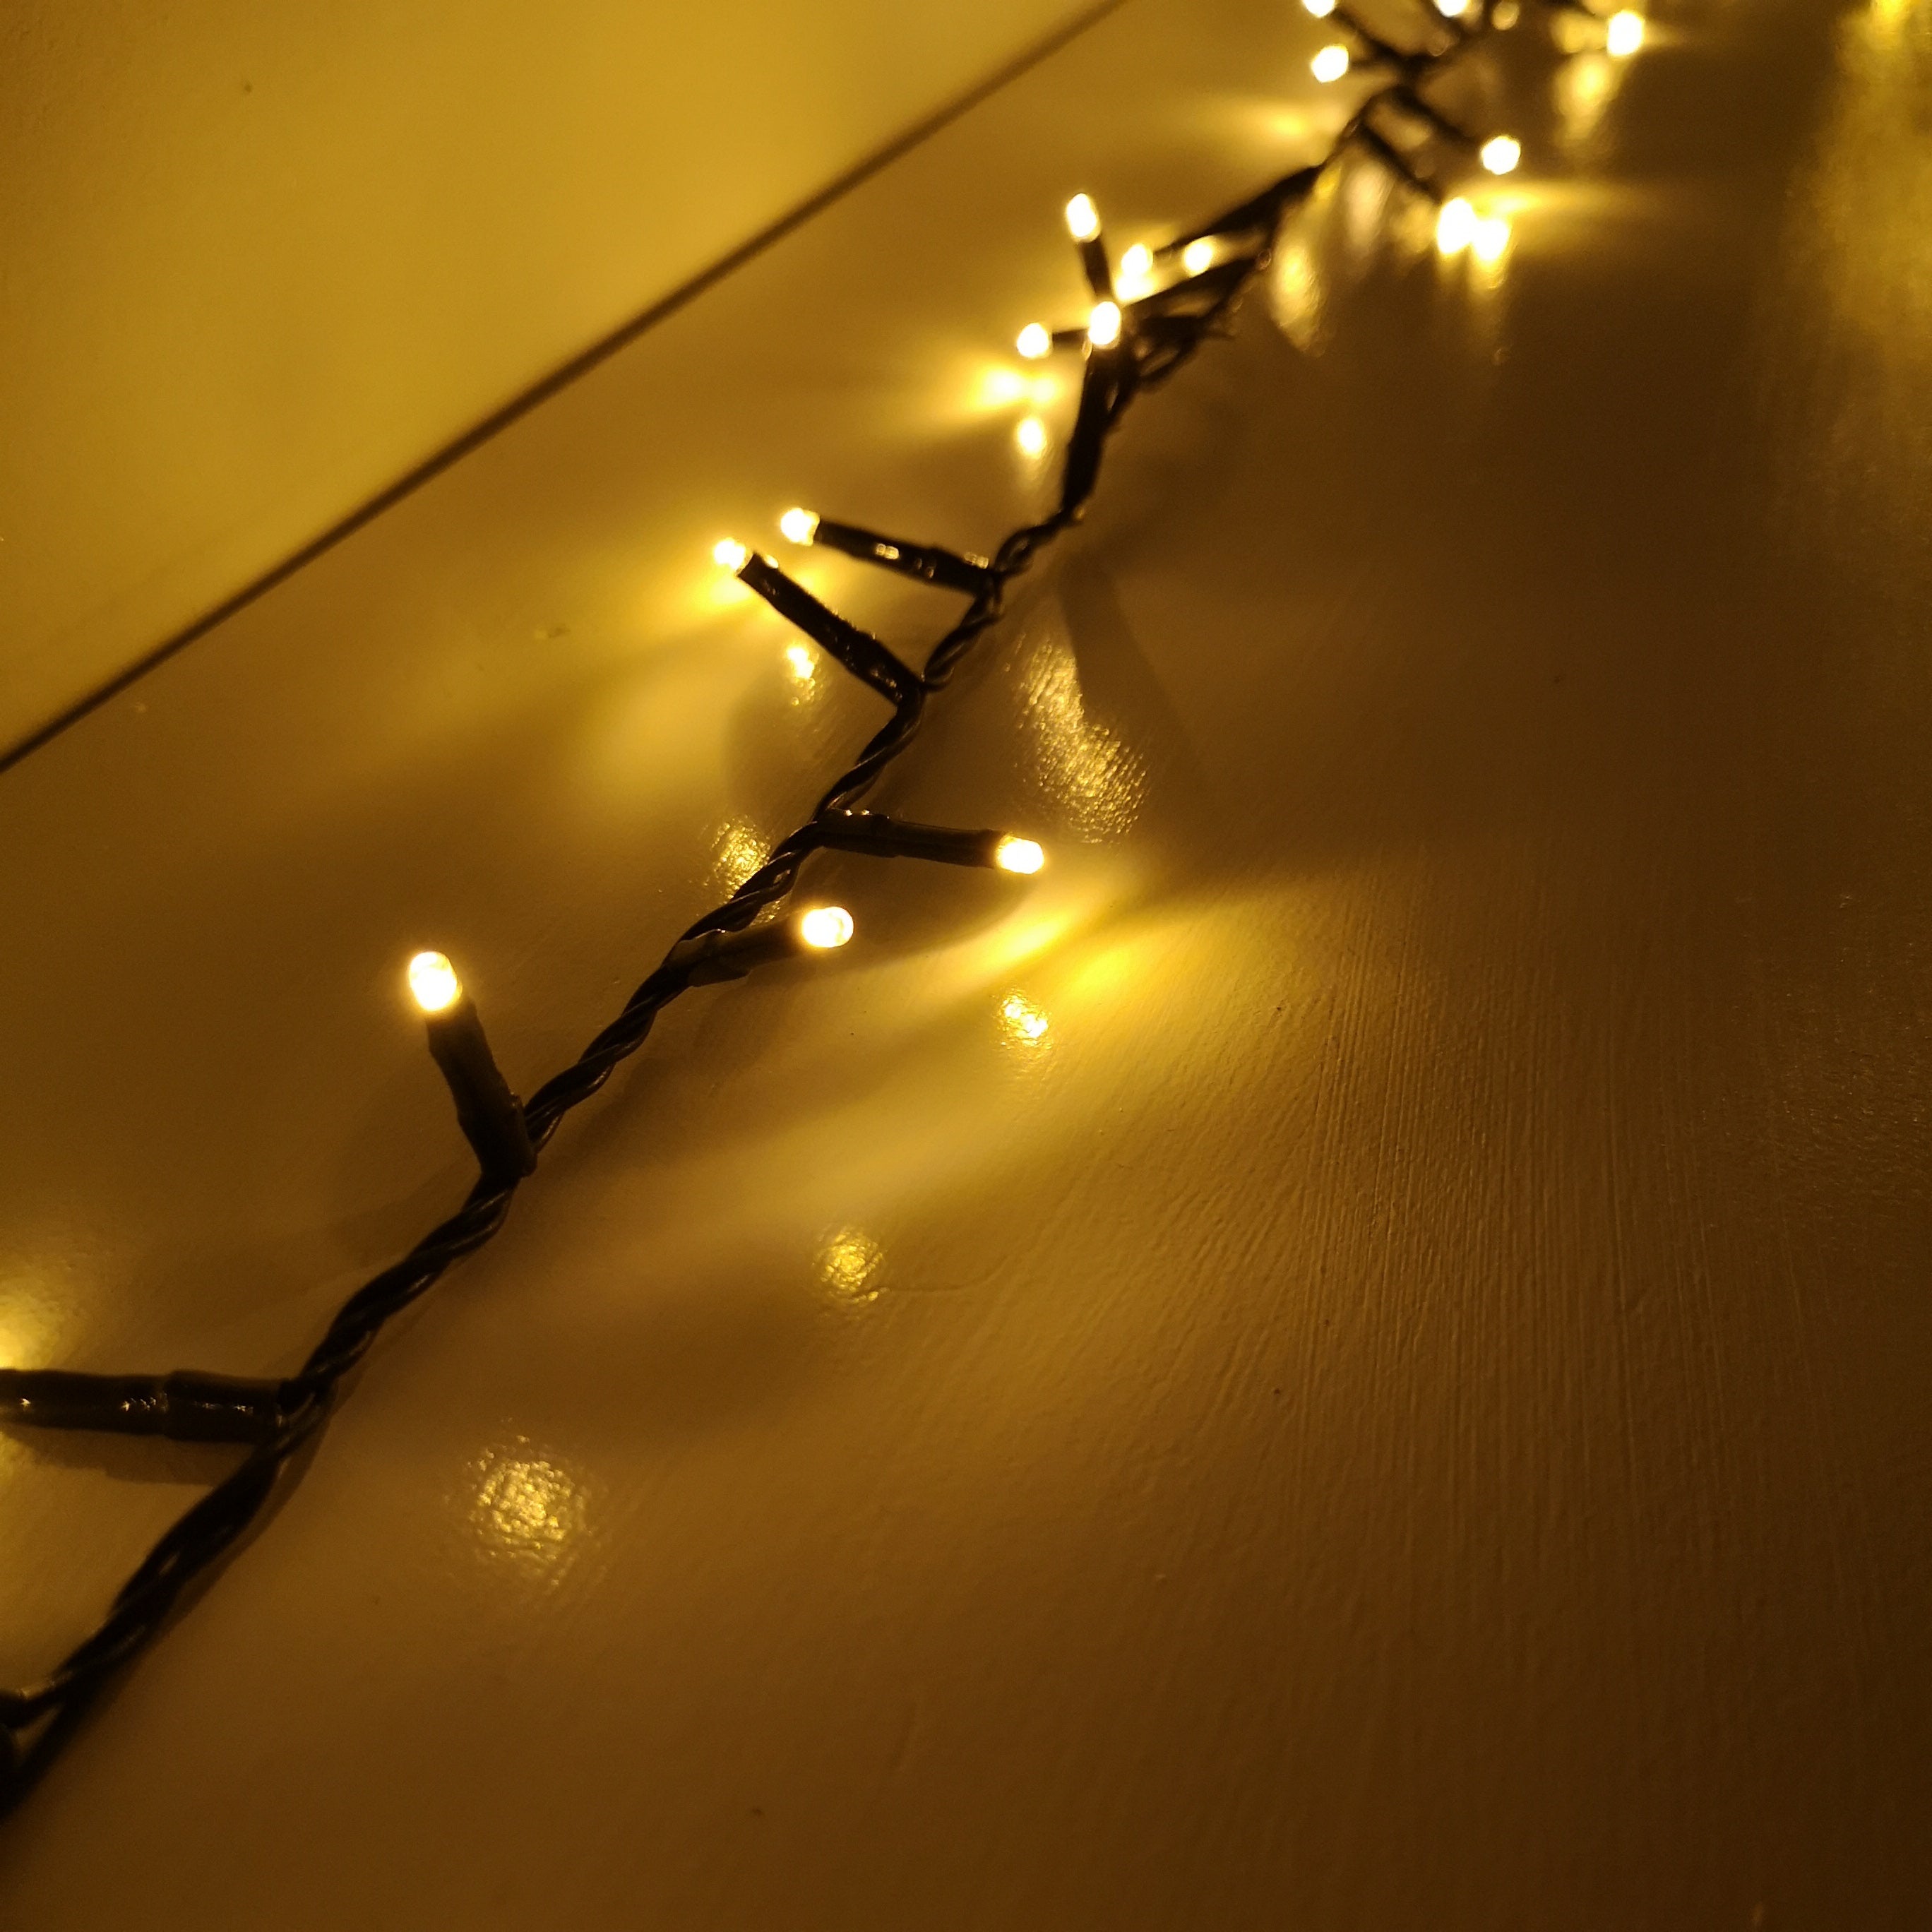 125m Treebrights Christmas Lights with 5000 LEDs in Vintage Gold with Timer